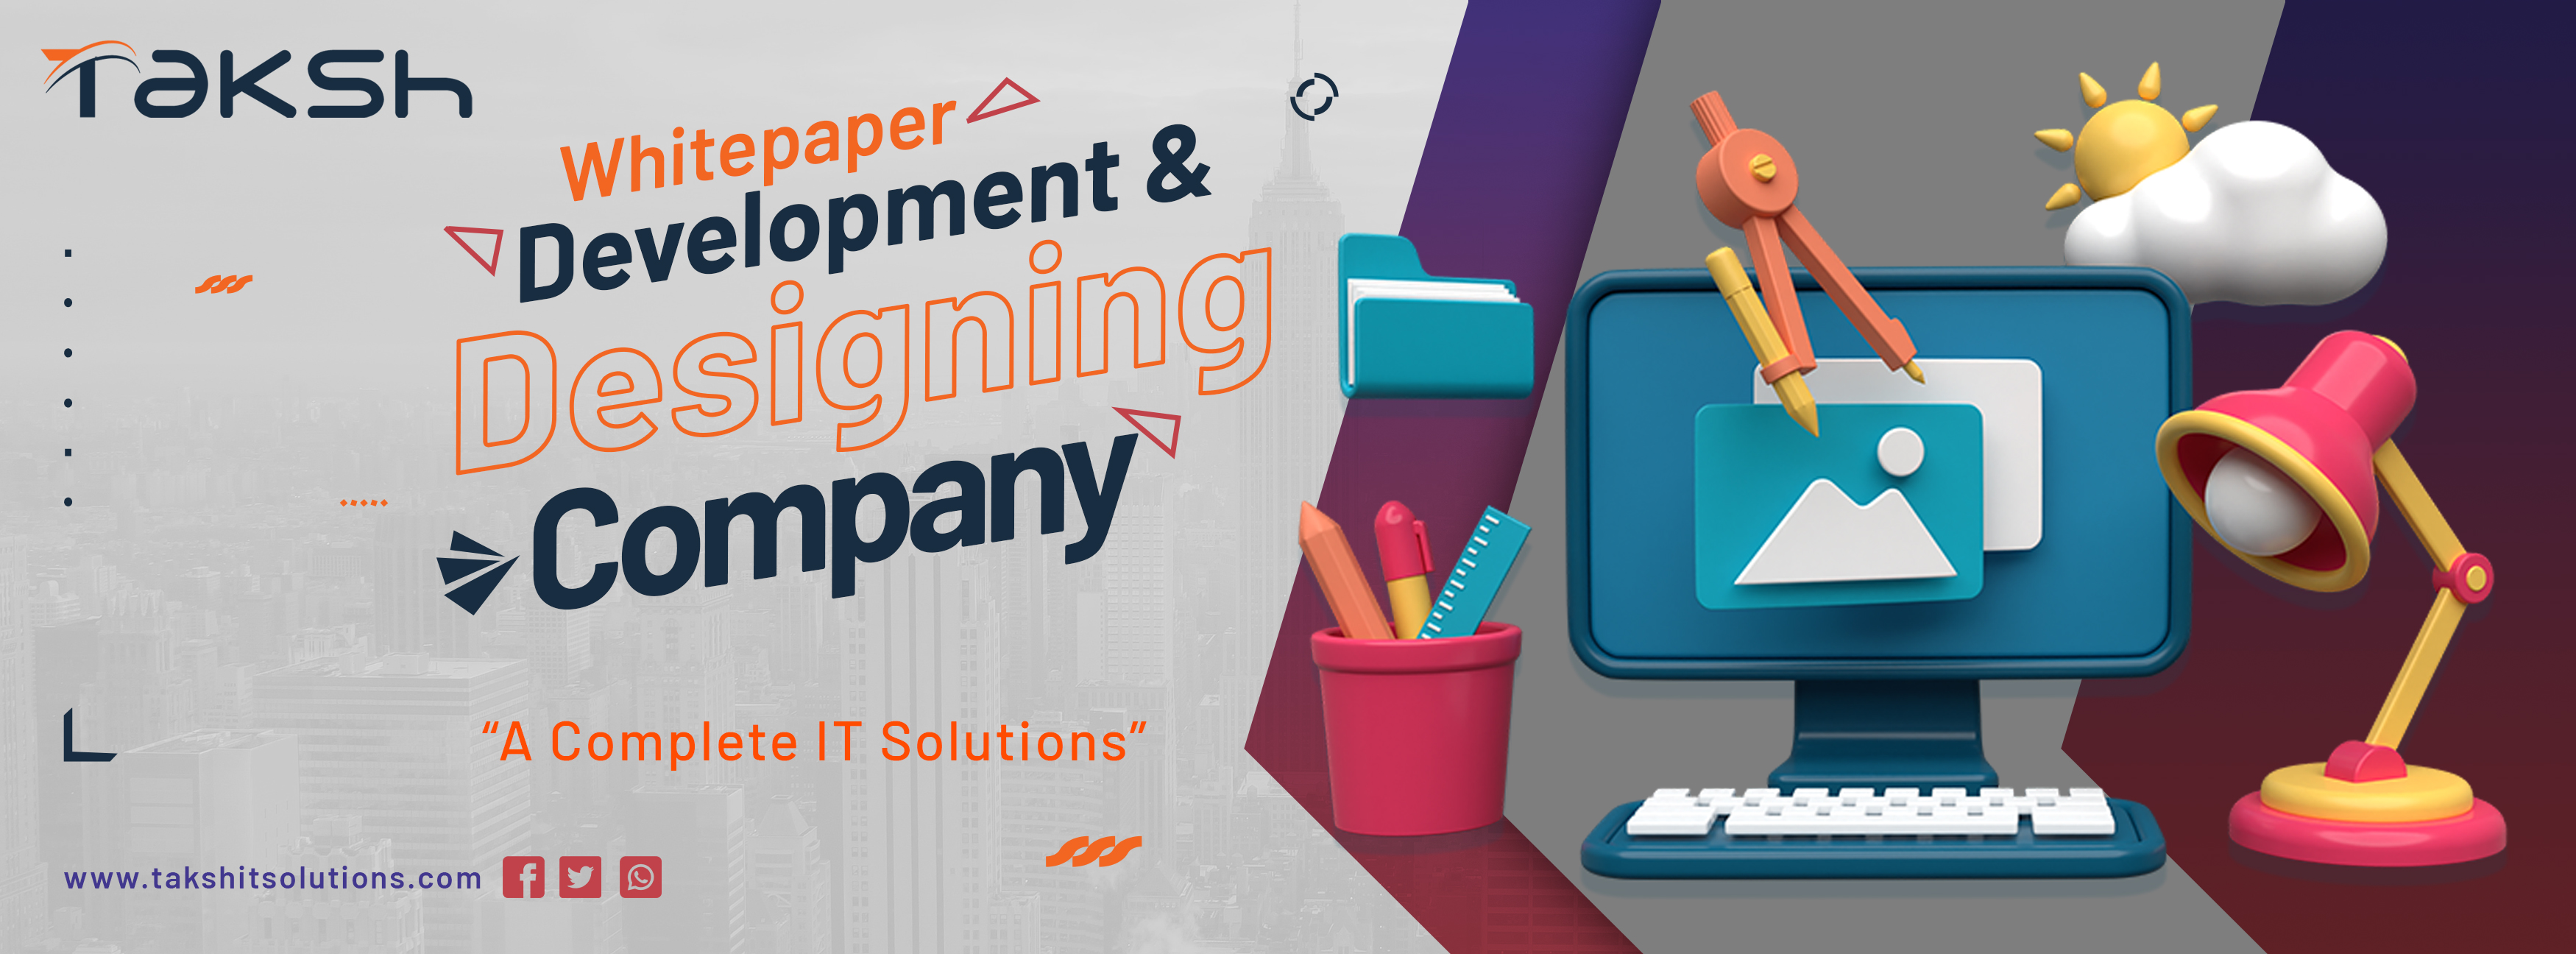 Whitepaper Development & Designing Company: Taksh IT Solutions Private Limited